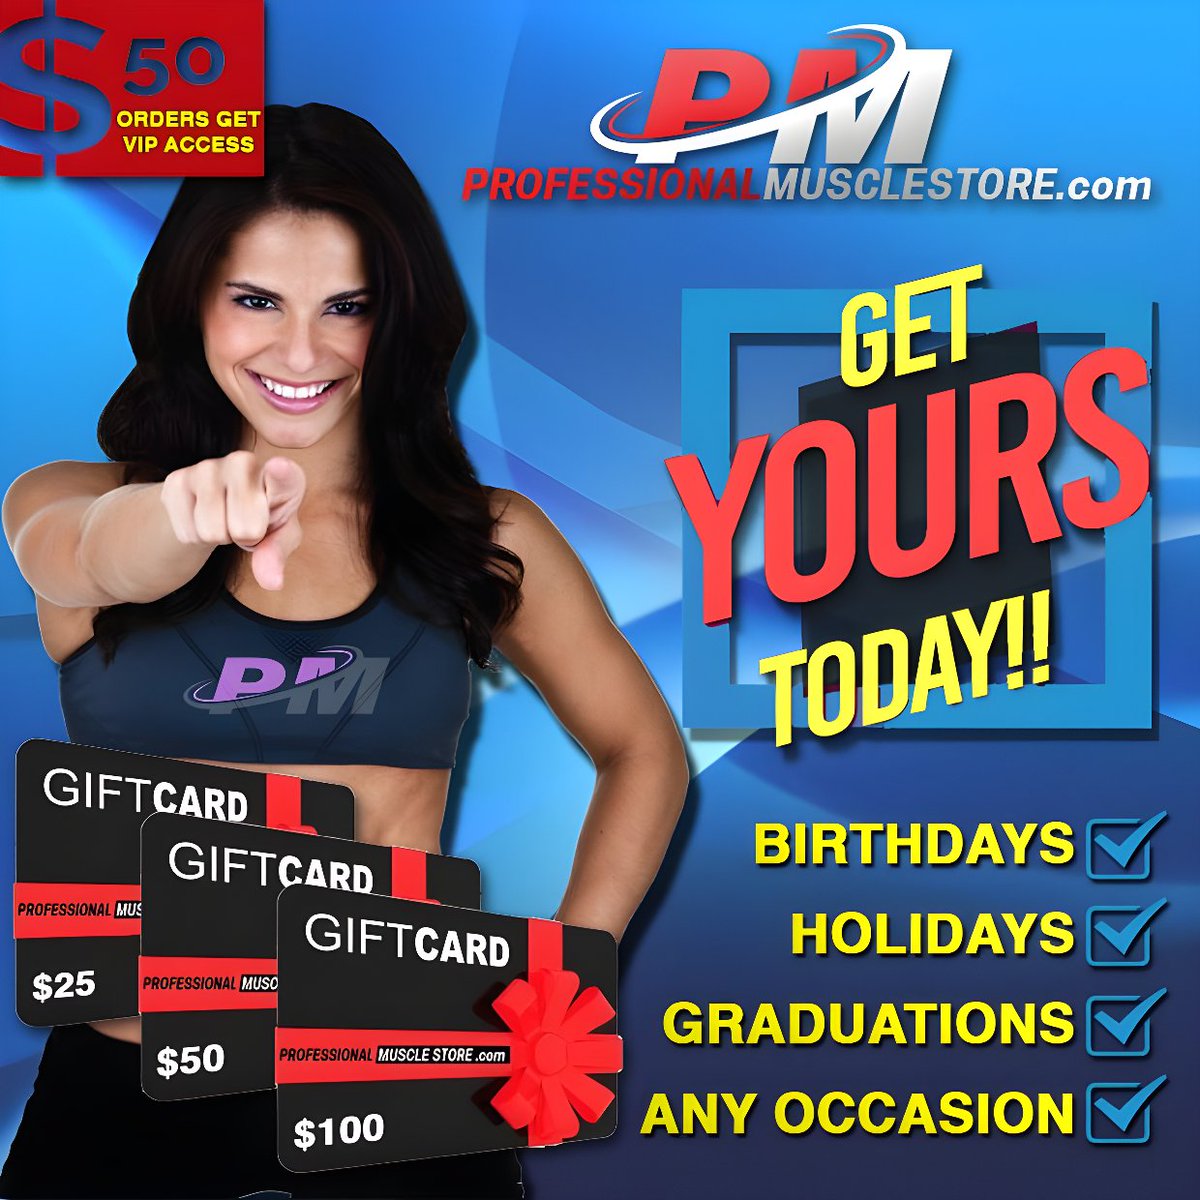 Give the Gift of Choice!! Gift card orders receive VIP access!
professionalmusclestore.com/products/gift-…
#giftcertificate #giftcard #holidays #birthdays #graduation #specialoccasion #anyoccasion #theperfectgift #fitness #bodybuilding #weightlifting #supplements #preworkout #postworkout #giftcard